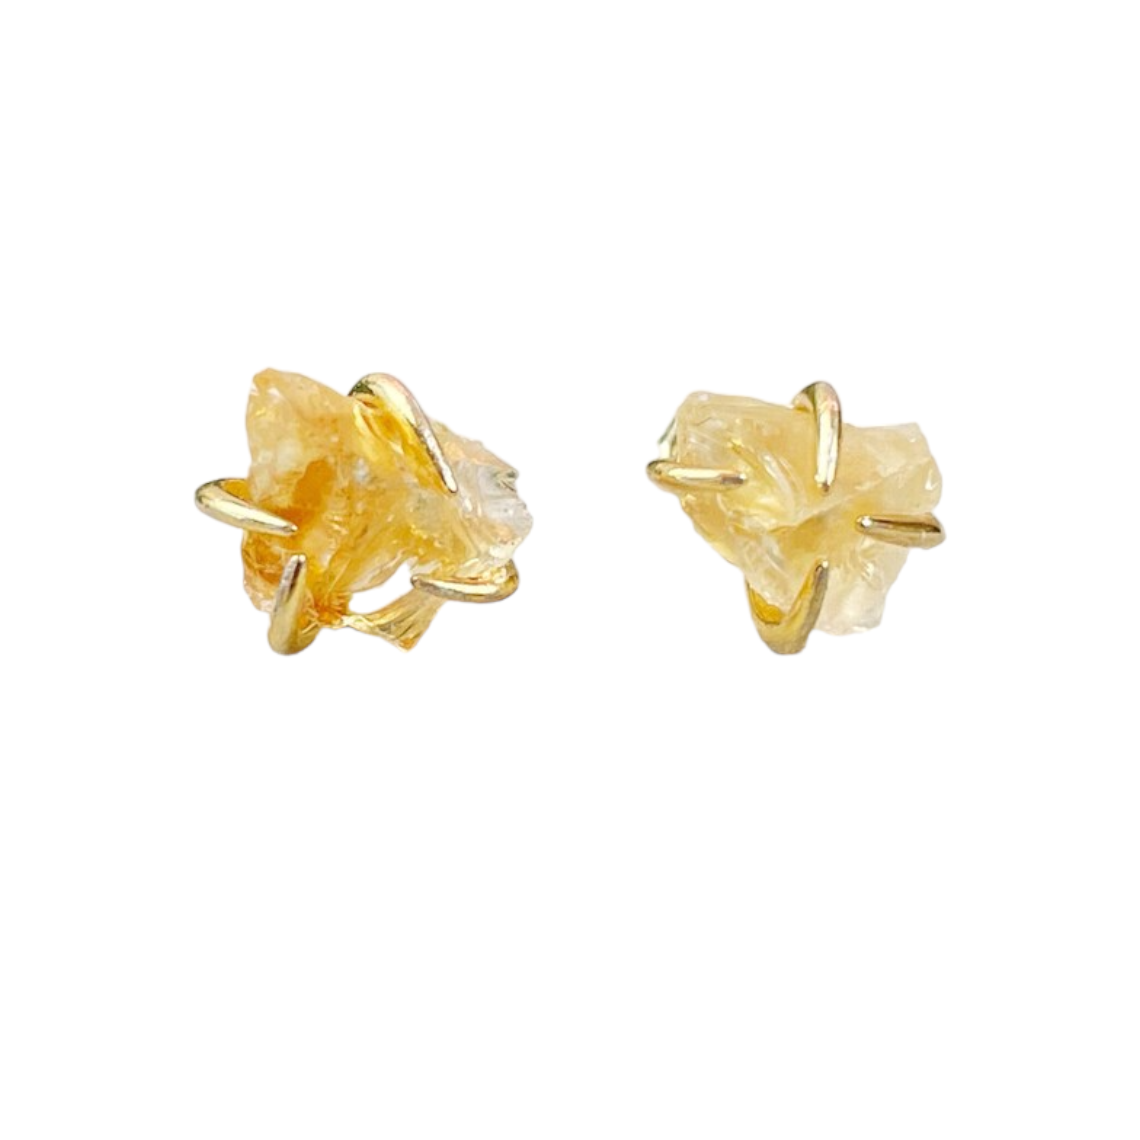 Natural Citrine Gemstone 925 Sterling Silver Stud Earrings rough Shape CZ Stud Earrings For Wholesale Suppliers